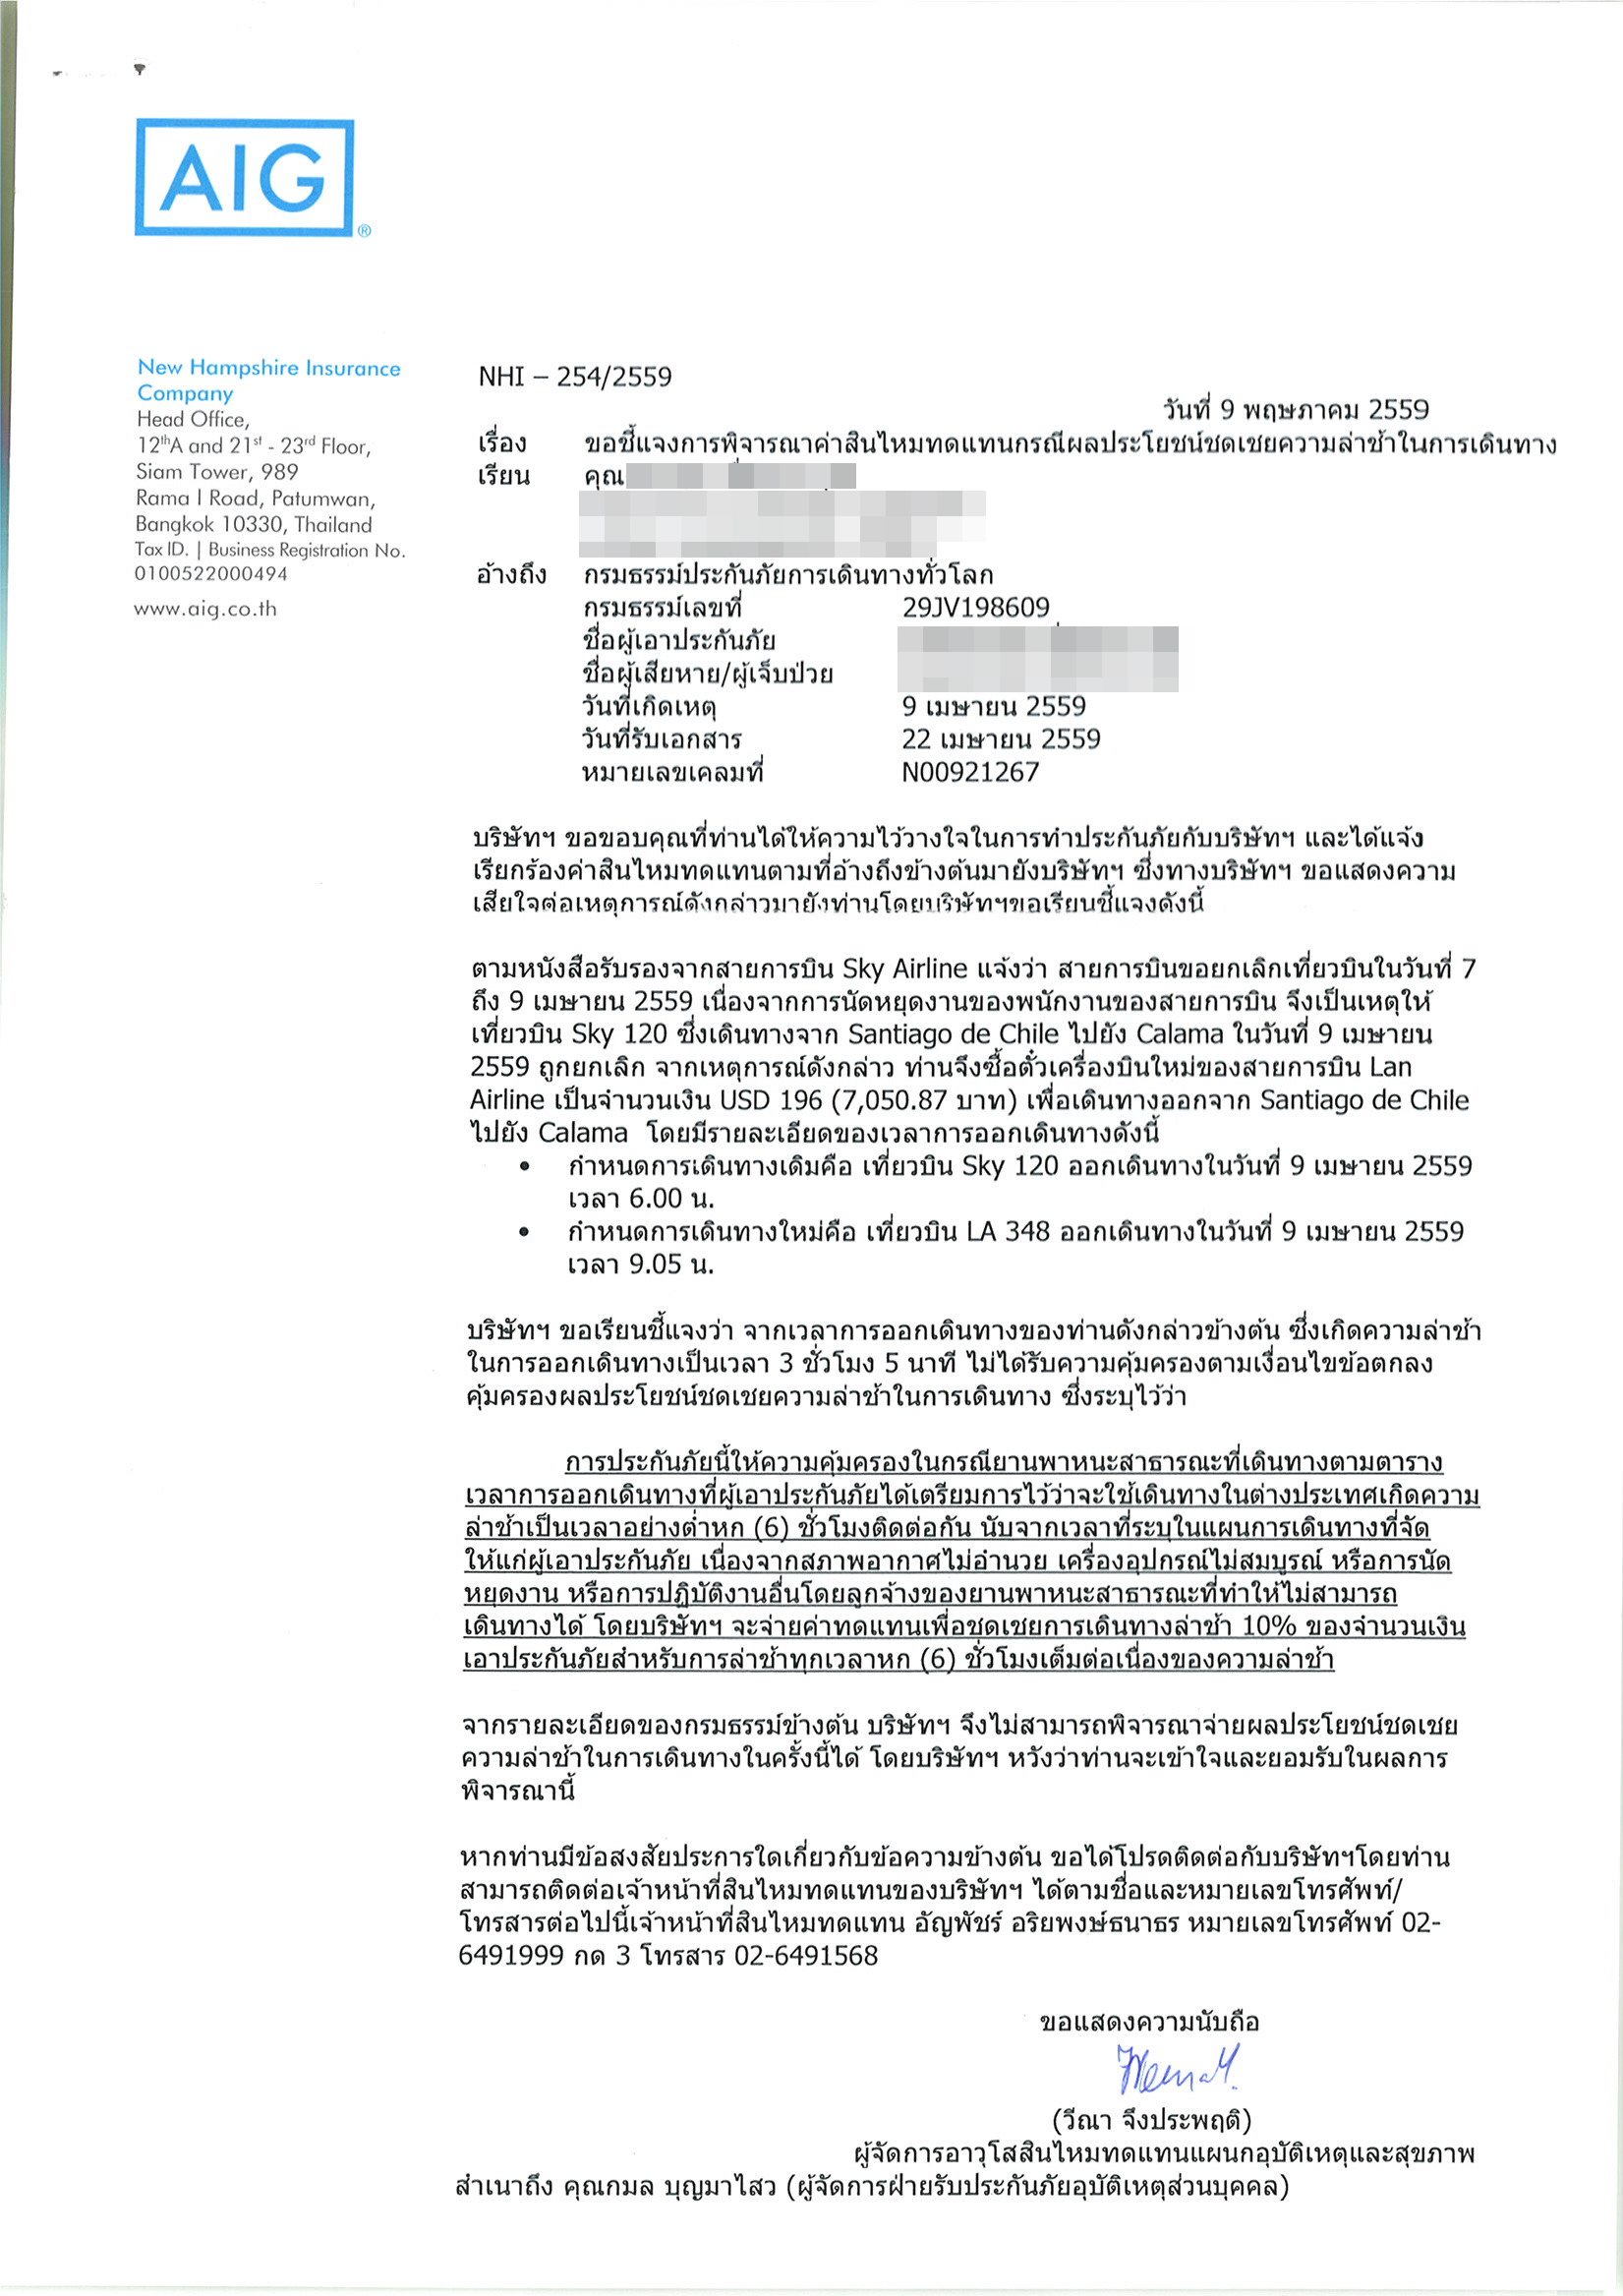 response-letter-from-aig